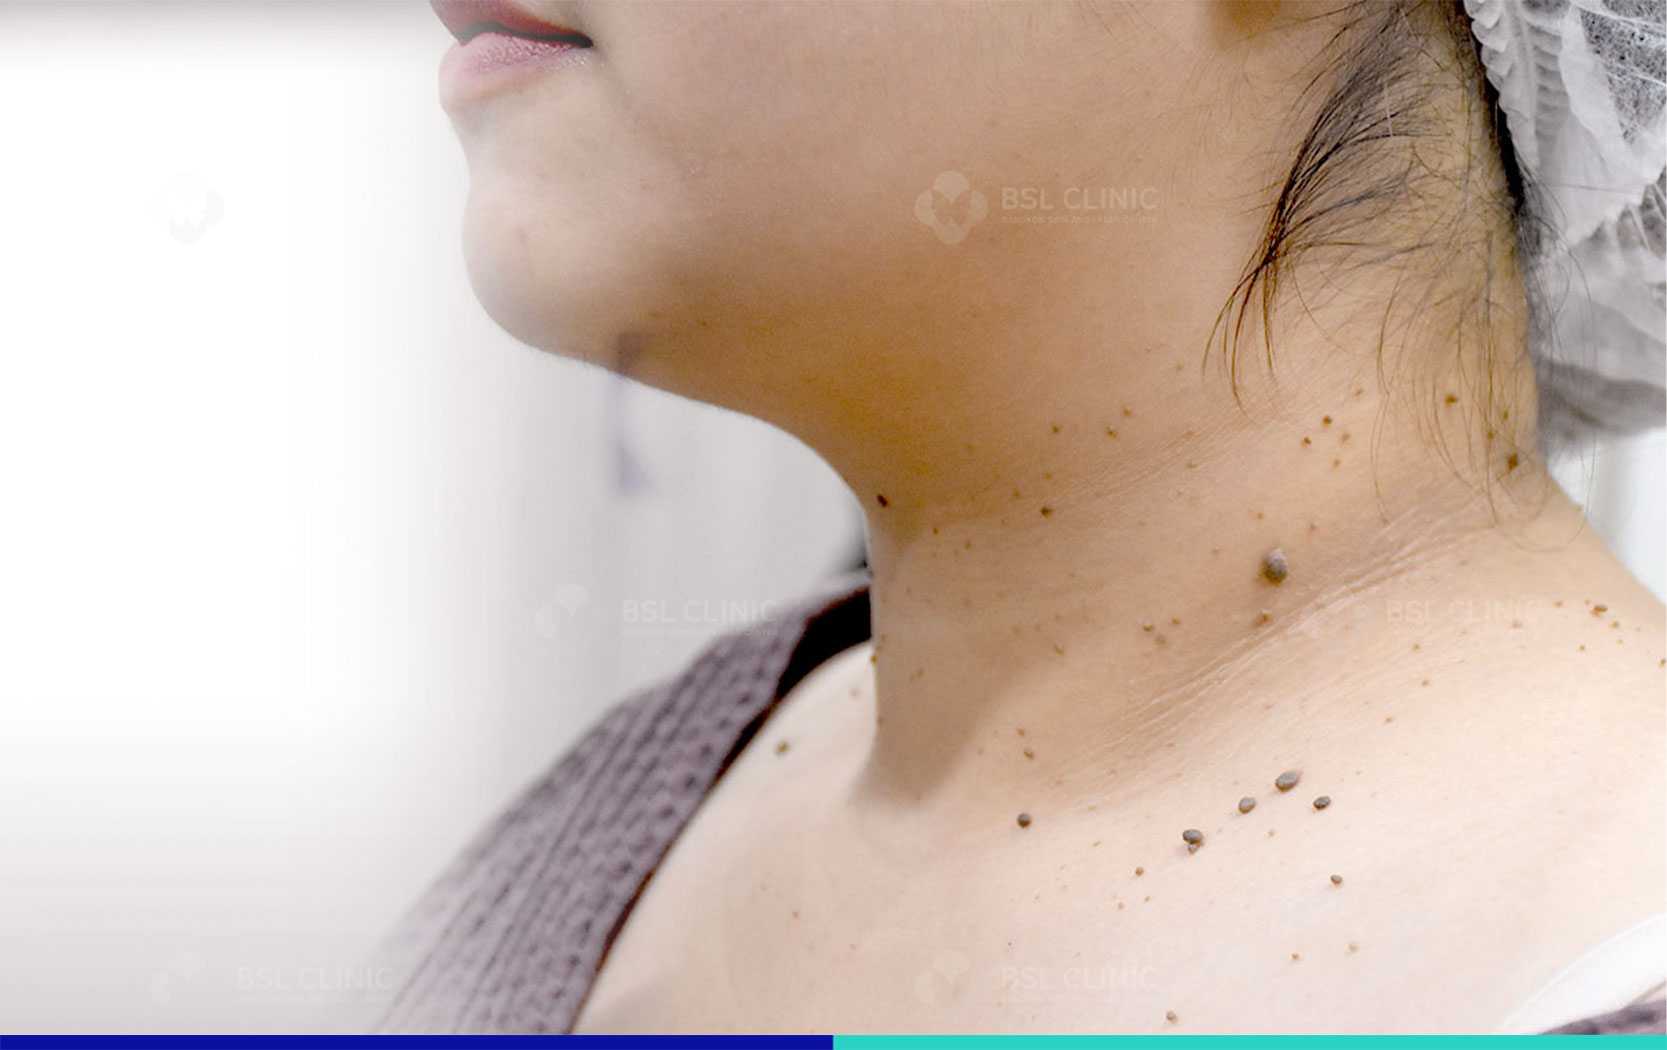 skin-tags-around-neck-and-shoulder-areas